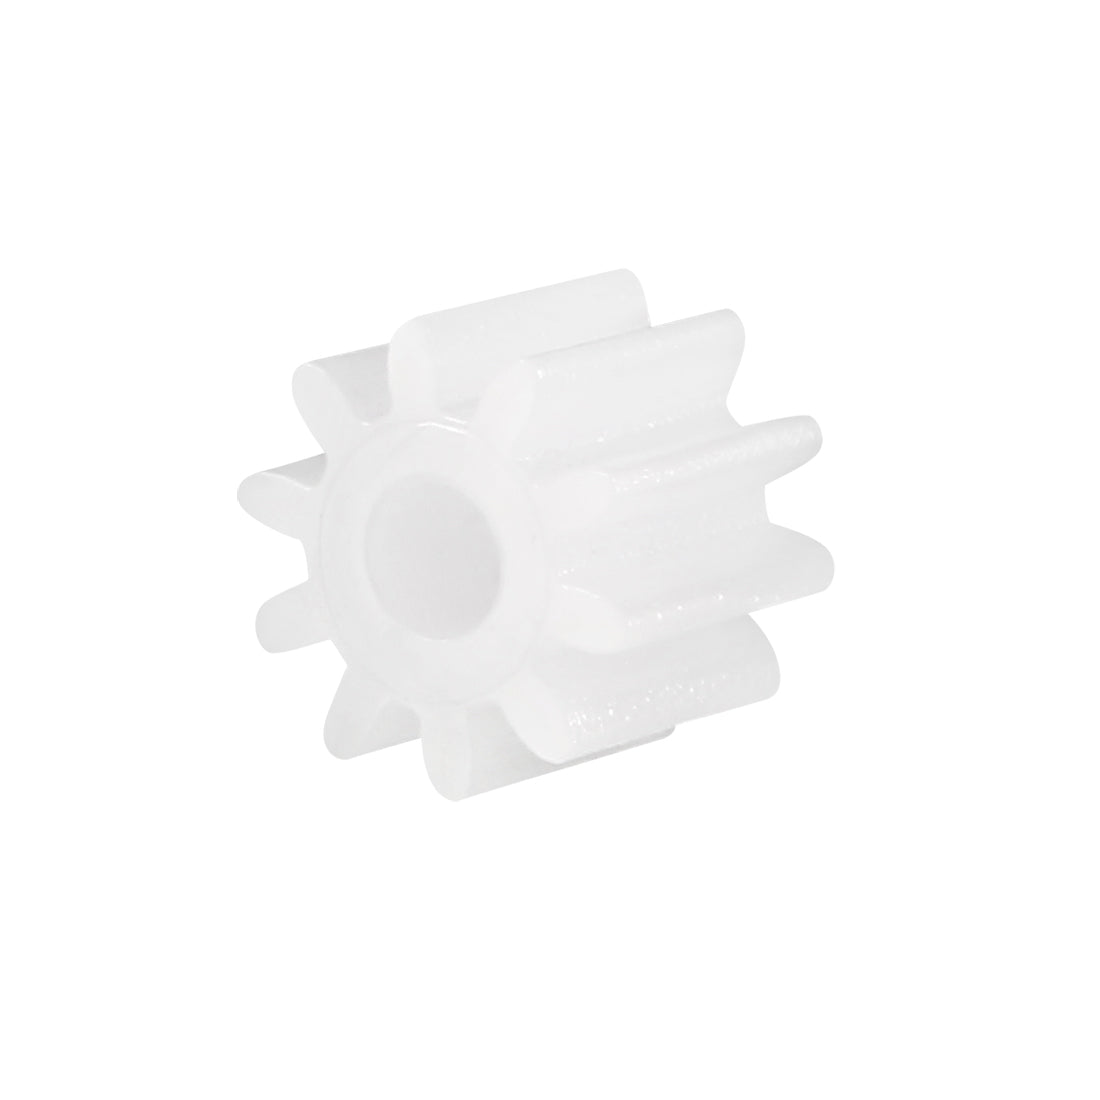 uxcell Uxcell 30Pcs 102A Plastic Gear Accessories 6mm OD w 10 Teeth for DIY Car Robot Motor